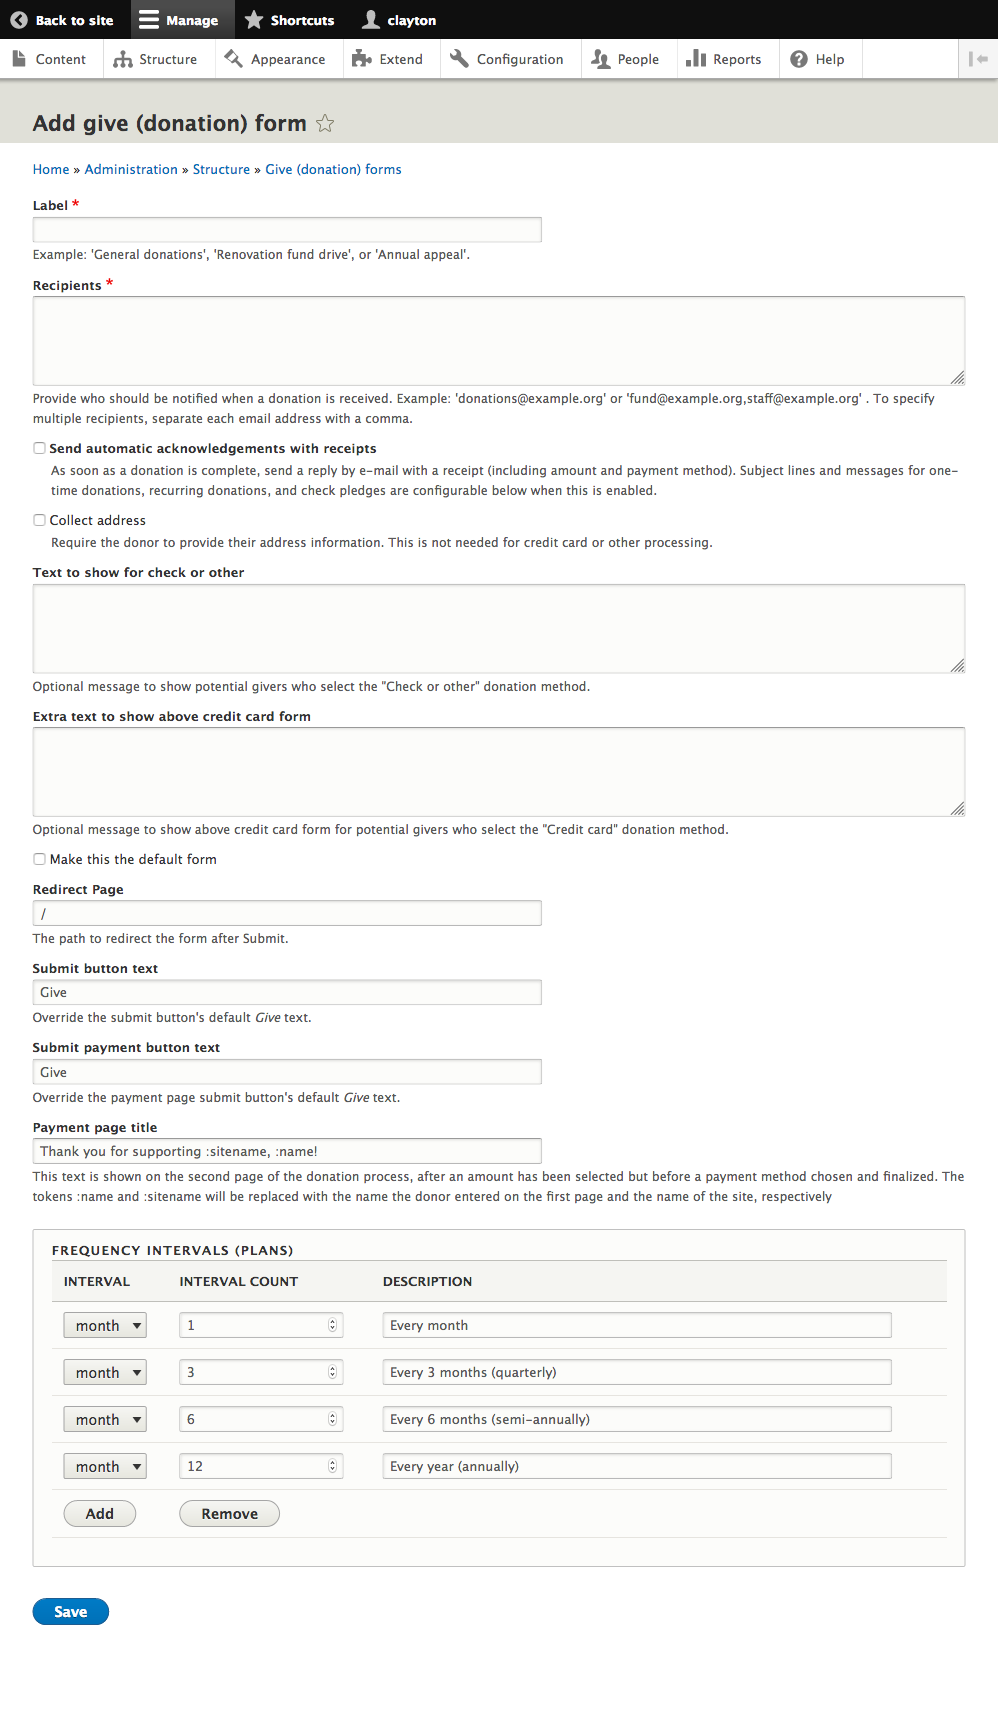 Give donation form creation page